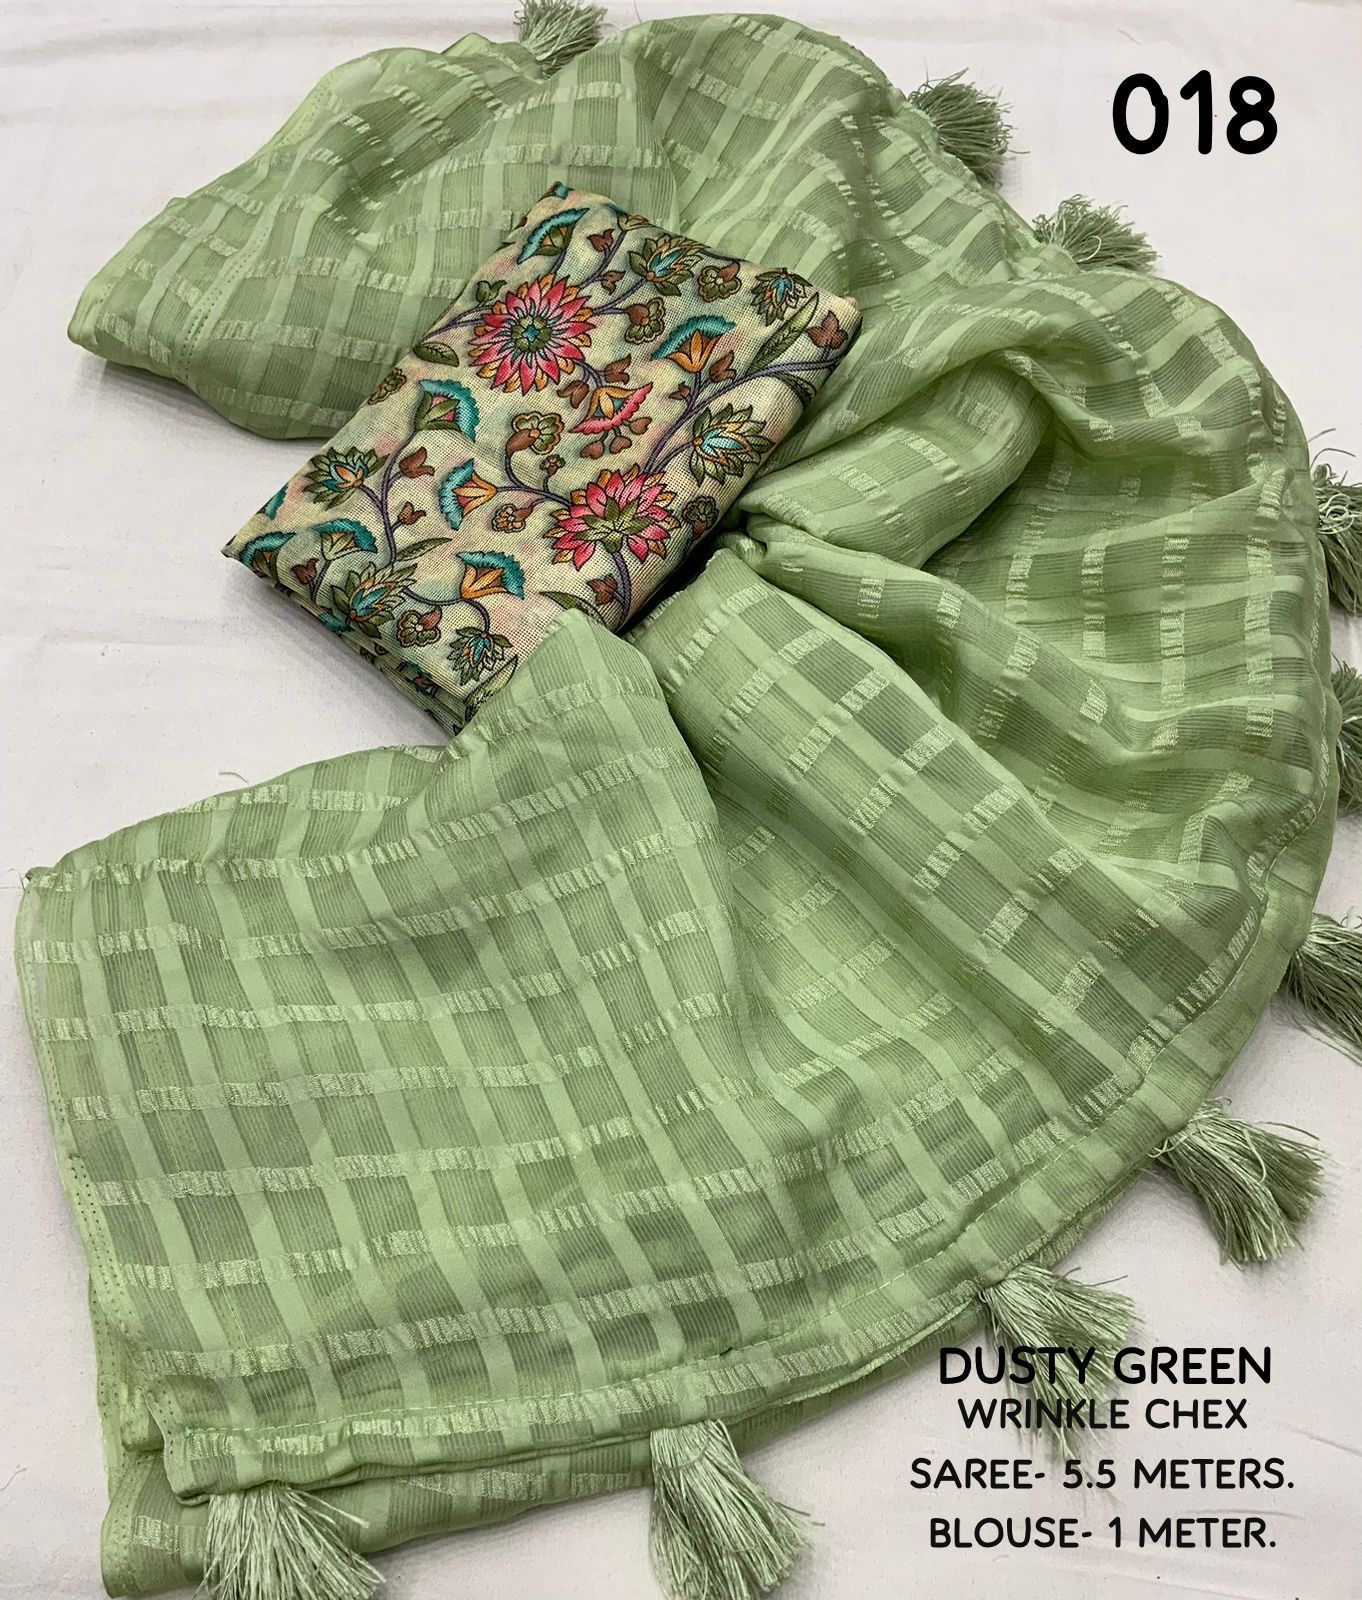 AK- WRINKLE CHEX DUSTY GREEN SAREE